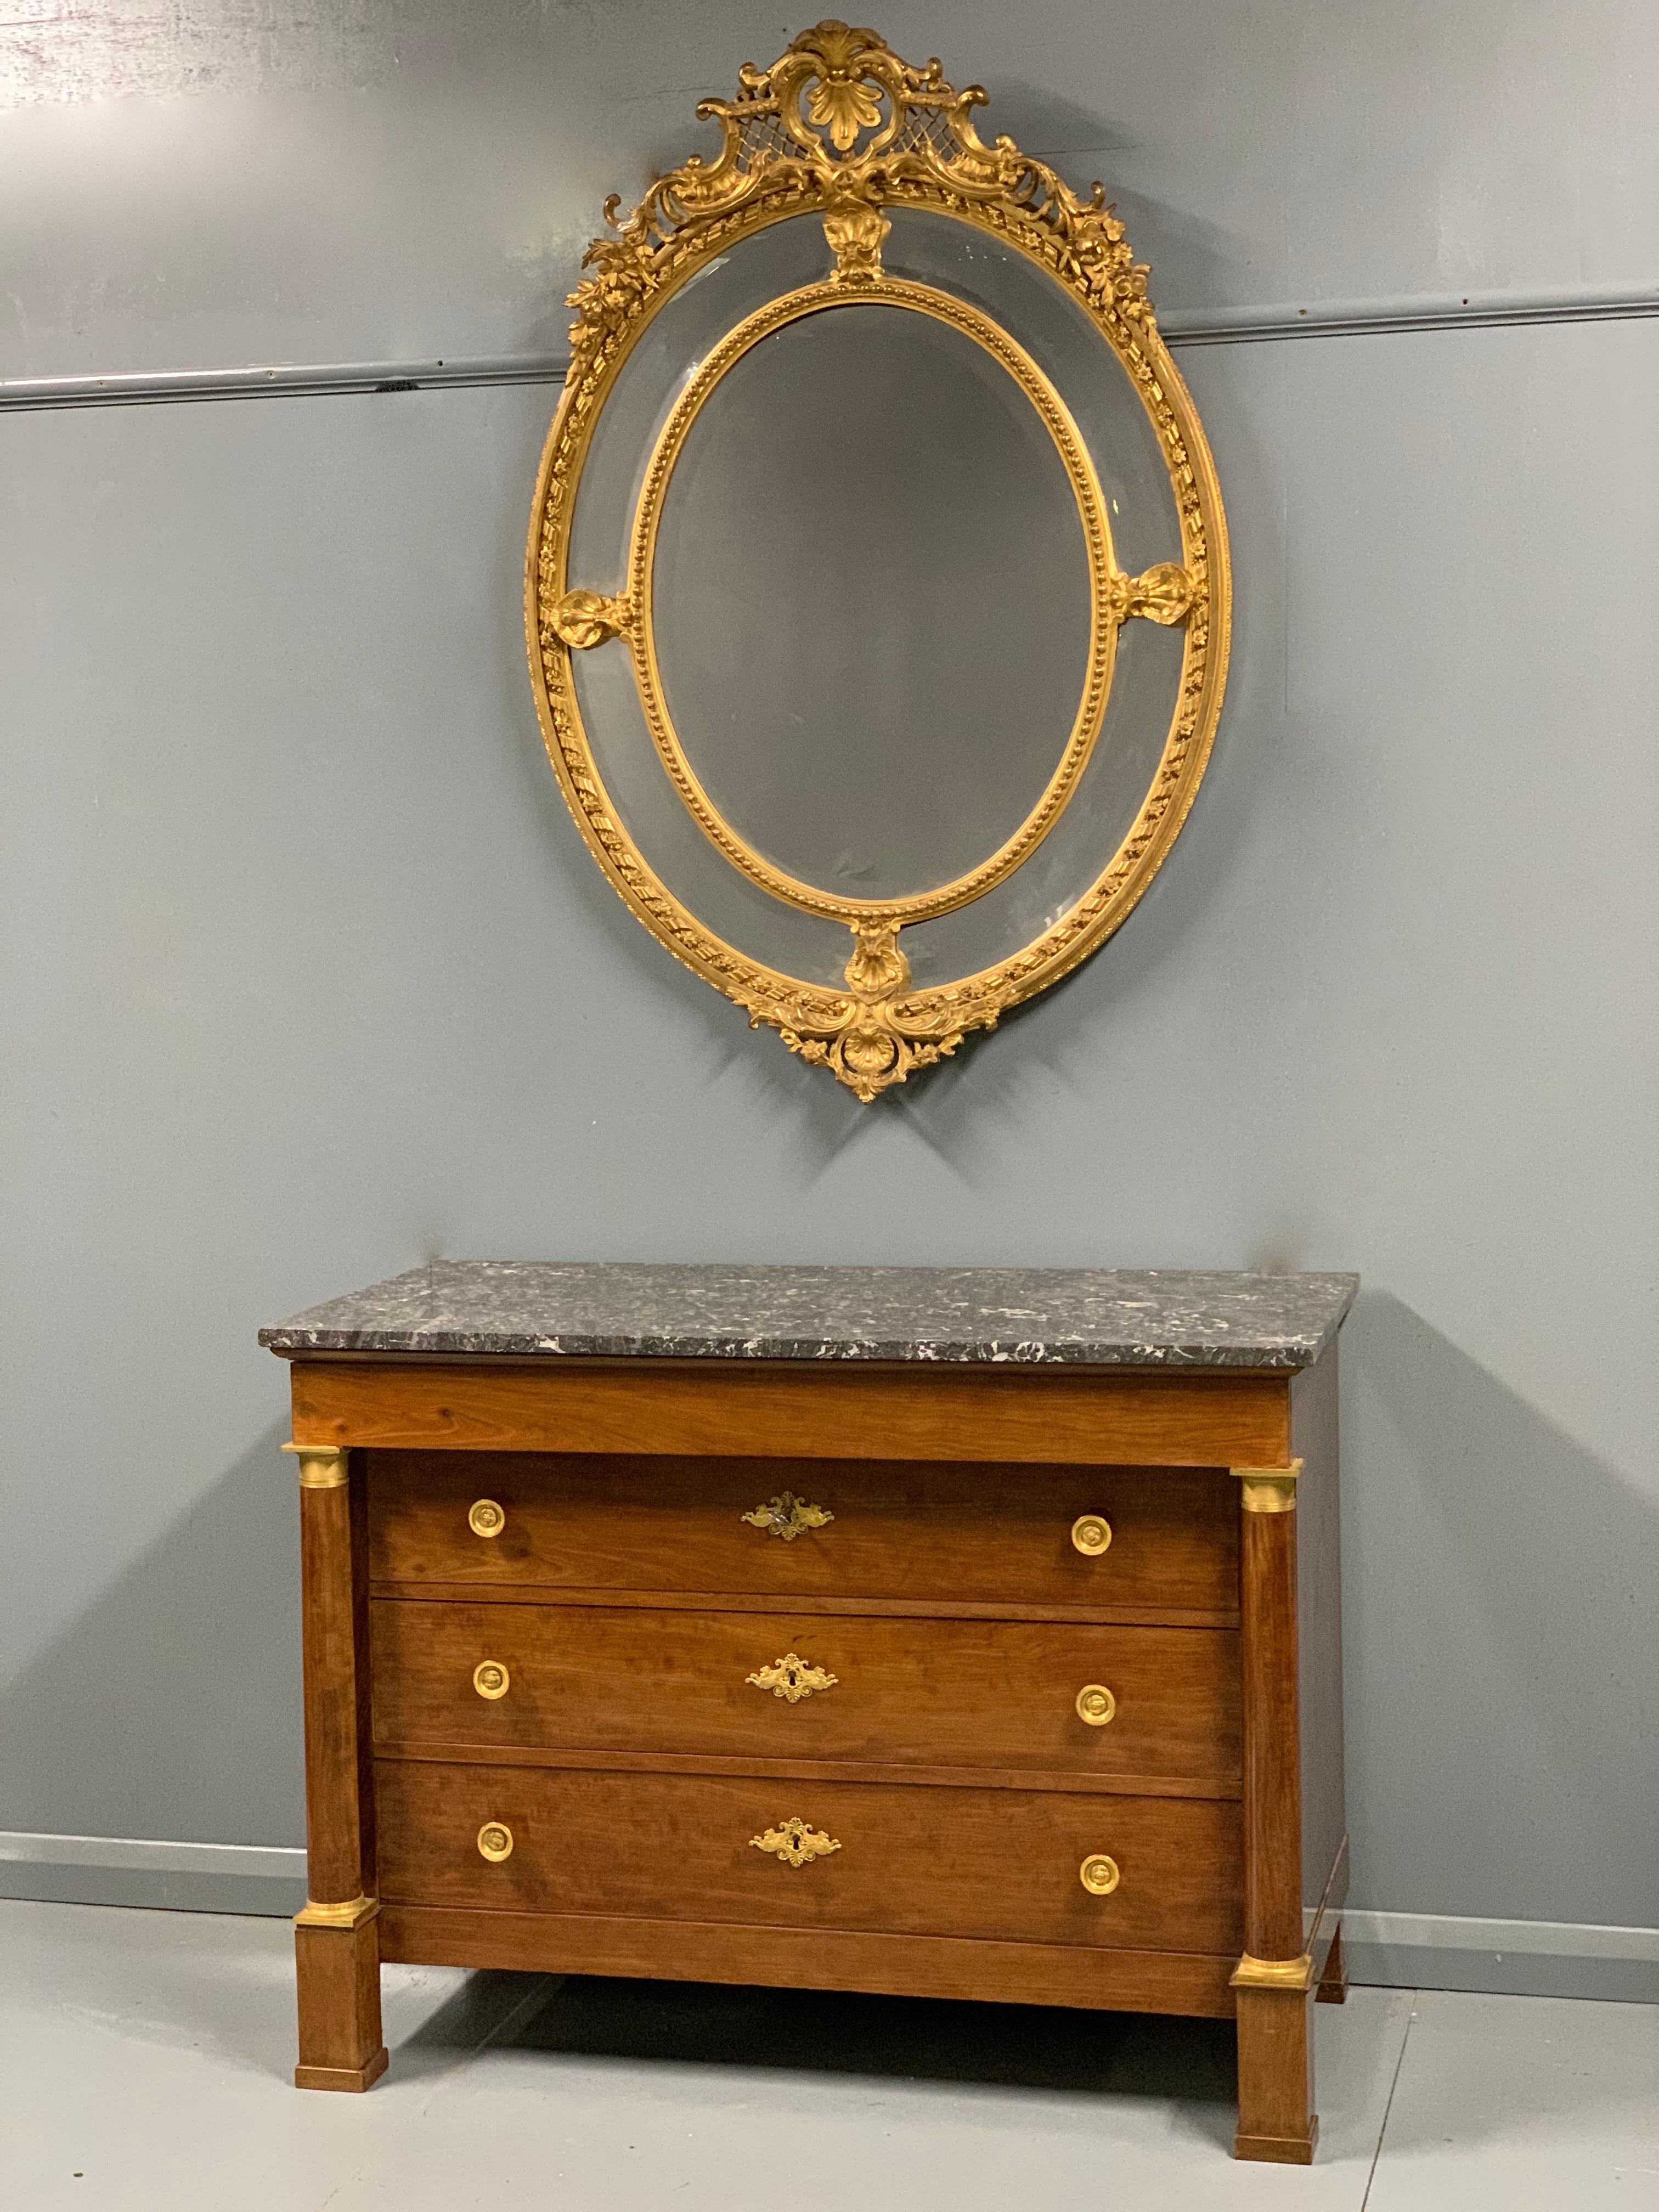 An exceptionally good quality and unusually large French 19th century Louis XVI style oval gilt mirror with all original bevelled edge mirror plates and retaining a lot of its original gold leaf.
The generous proportions of this mirror really do